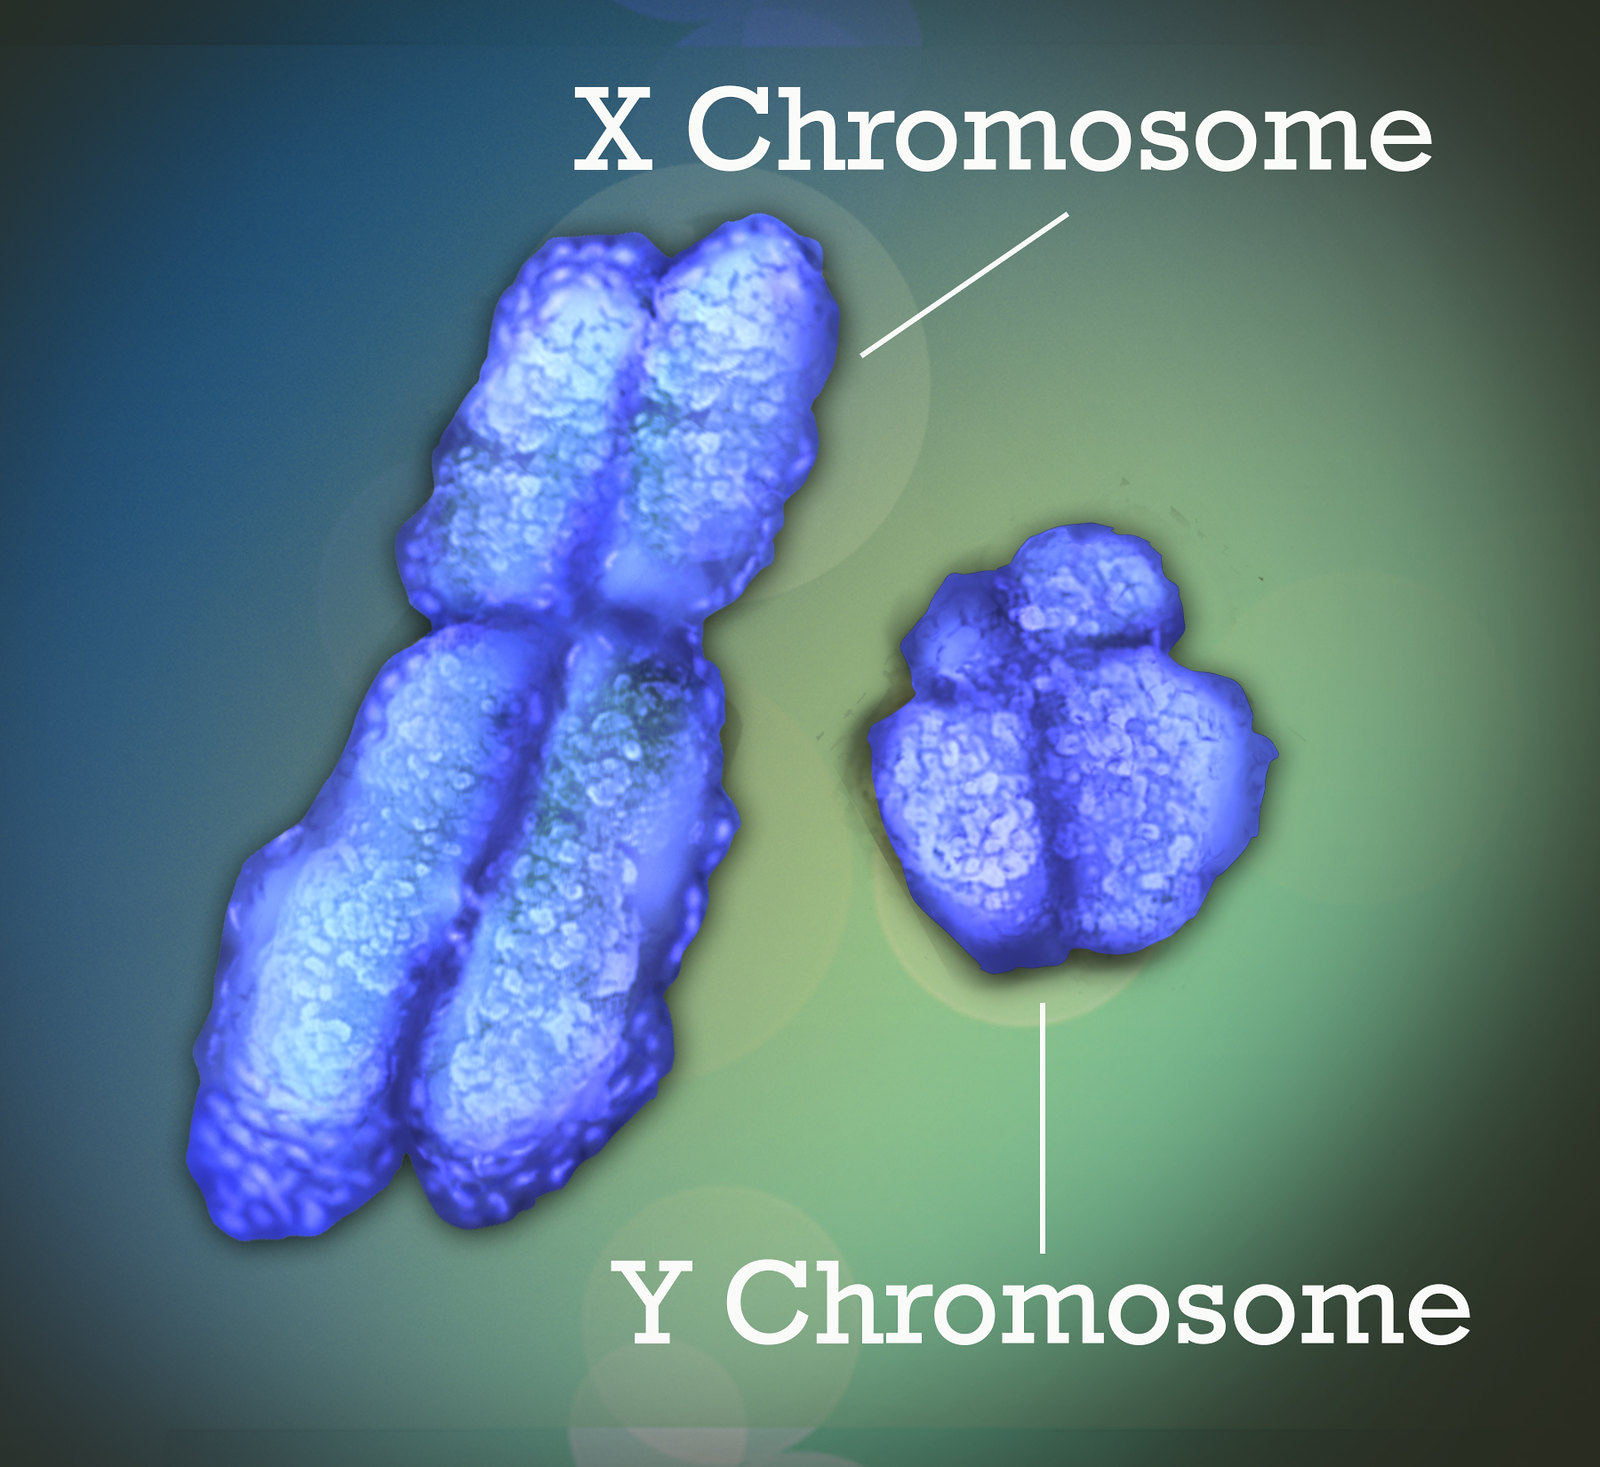 Image shows a artists rendition of the comparative sizes of the X and Y chromosome. The X chromosome is much larger than the Y chromsosome.